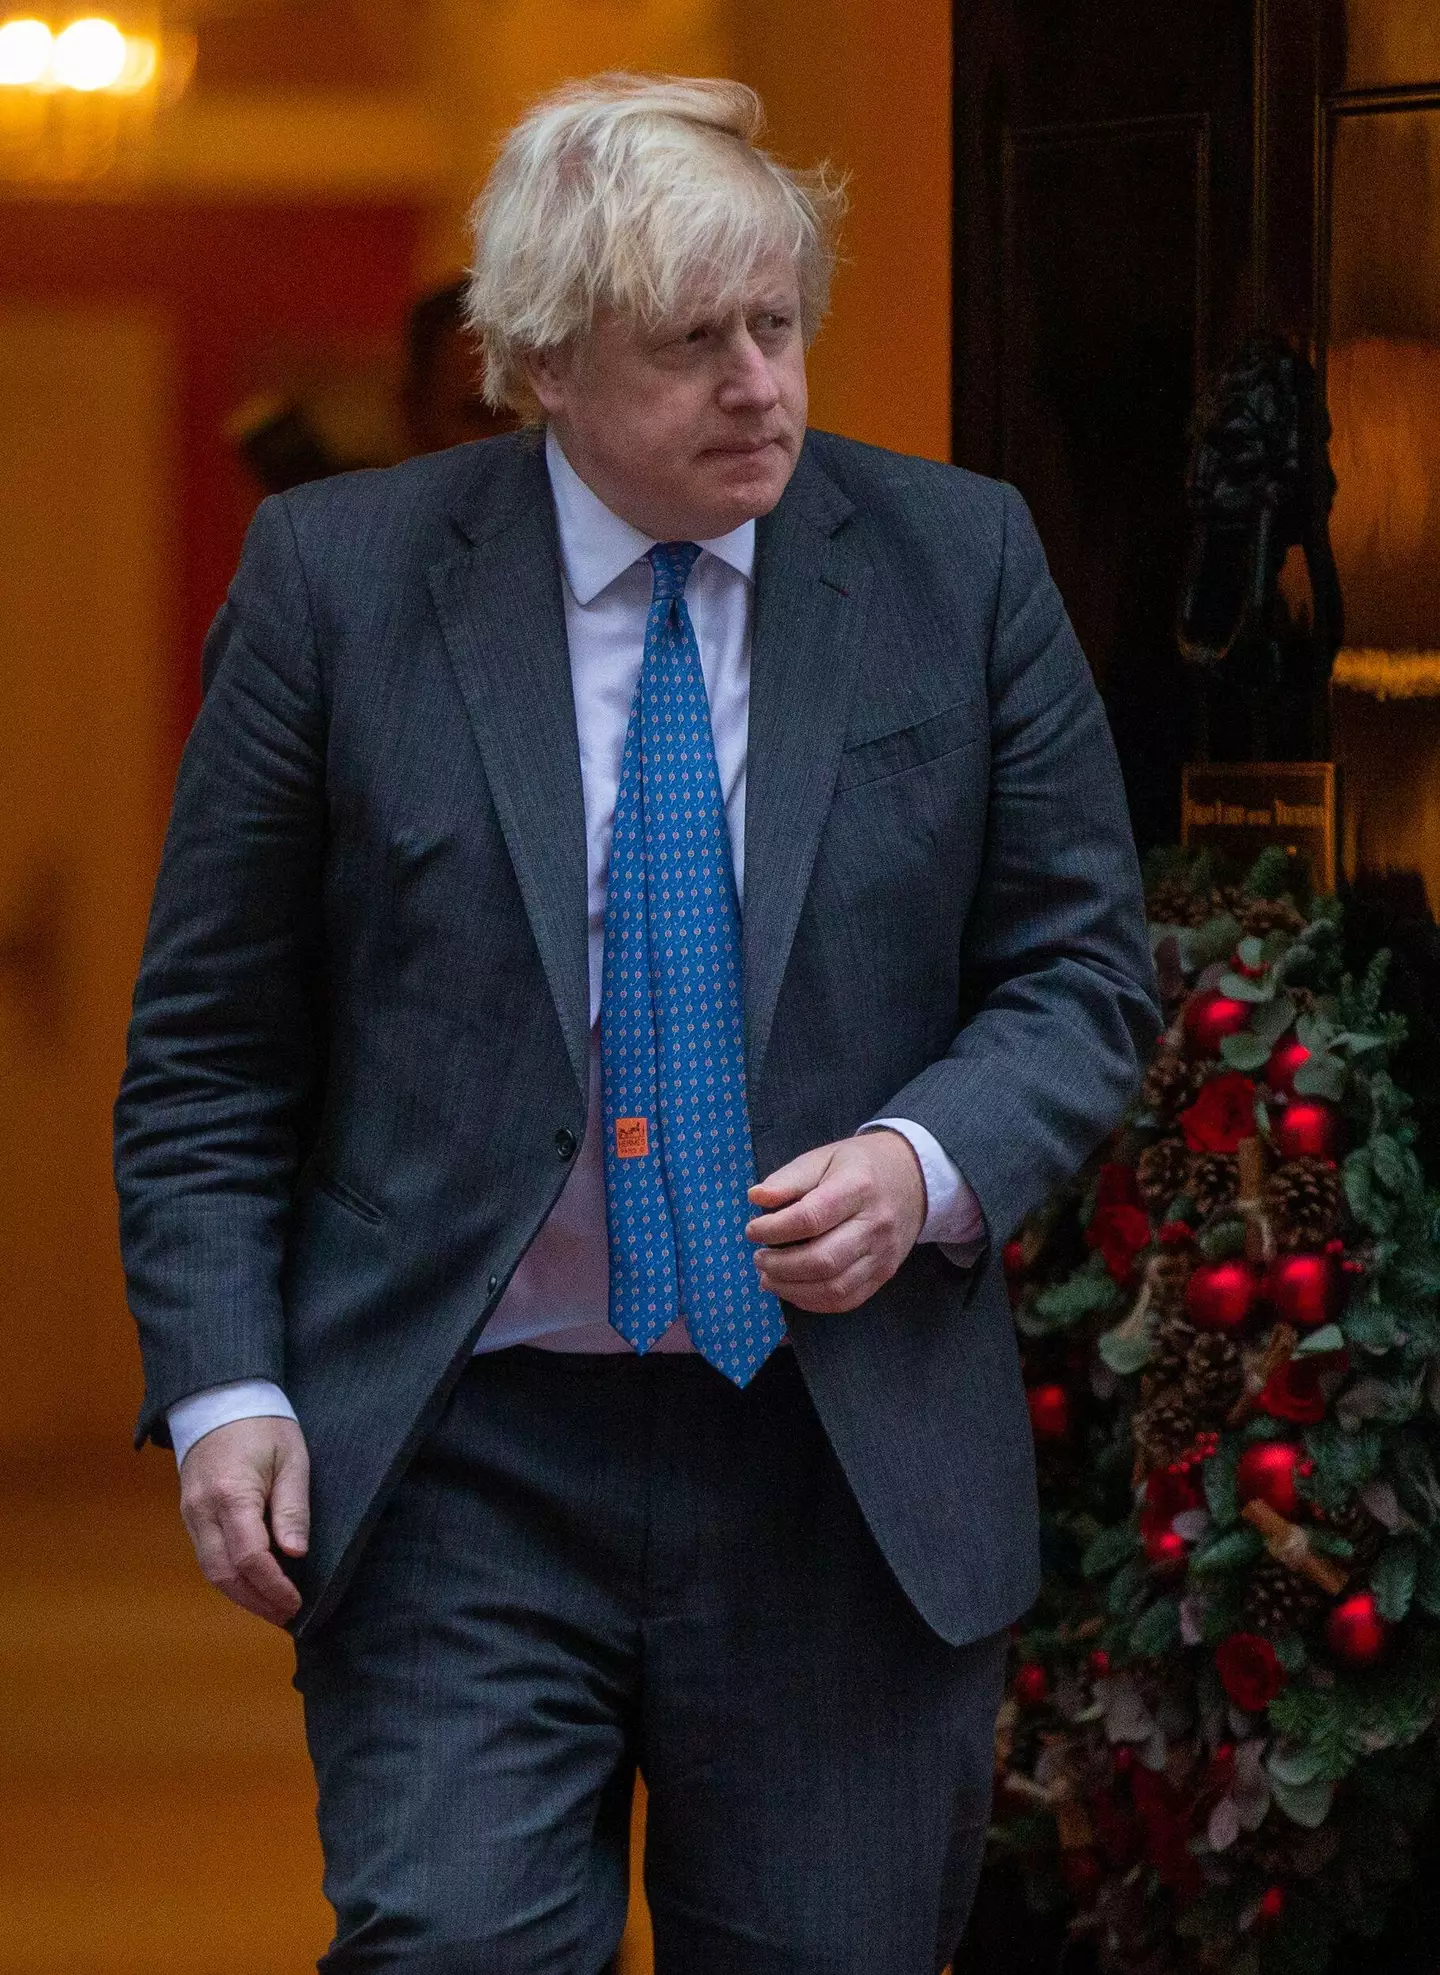 Boris Johnson has come under pressure after another party was found to have taken place at No.10 during lockdown.